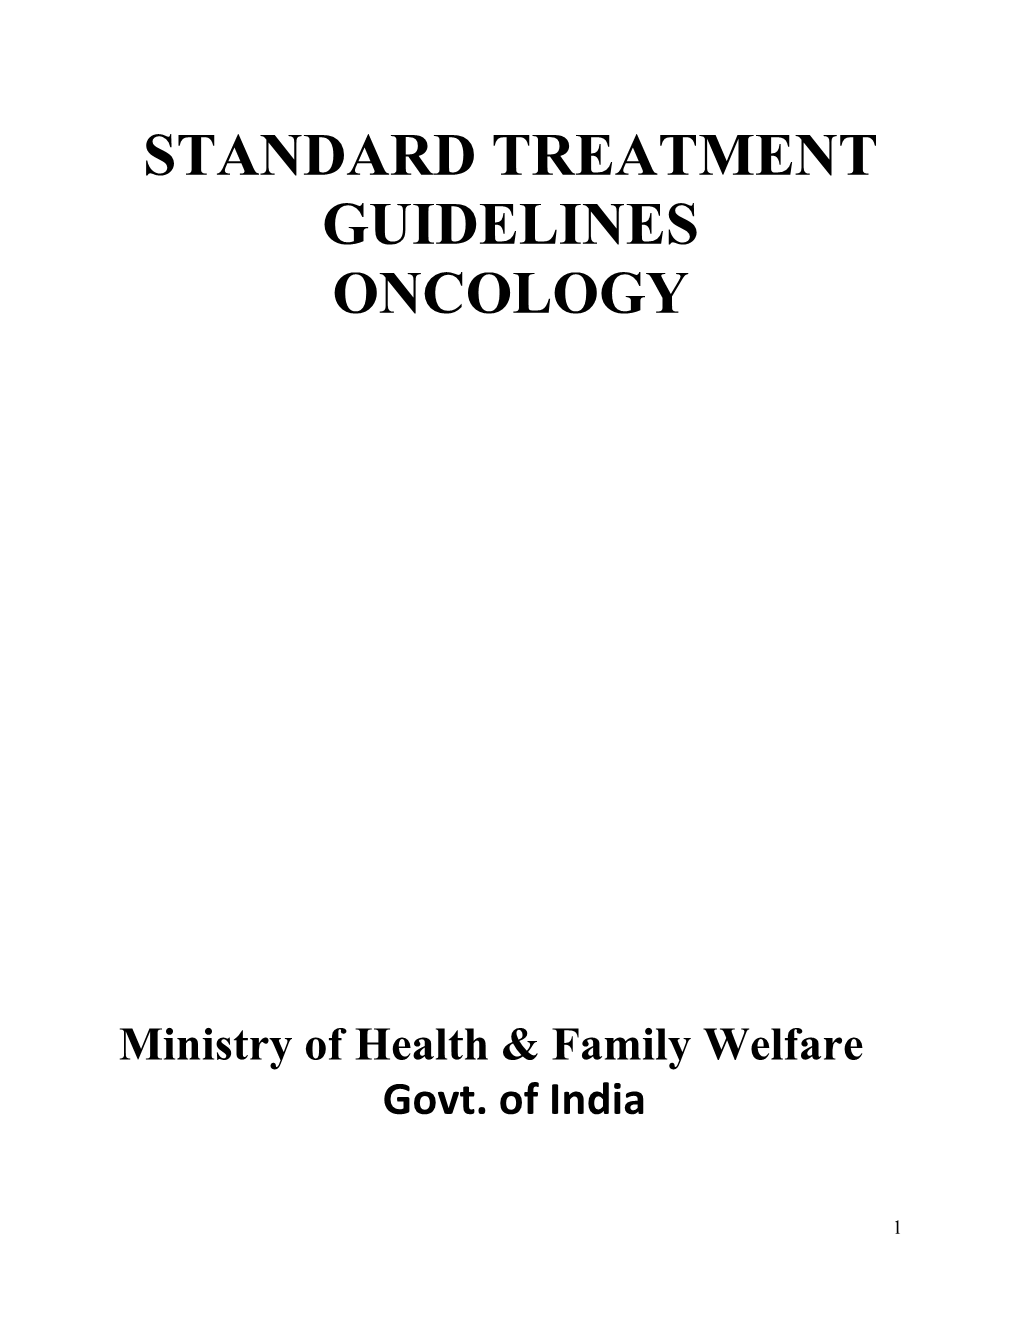 Standard Treatment Guidelines Oncology